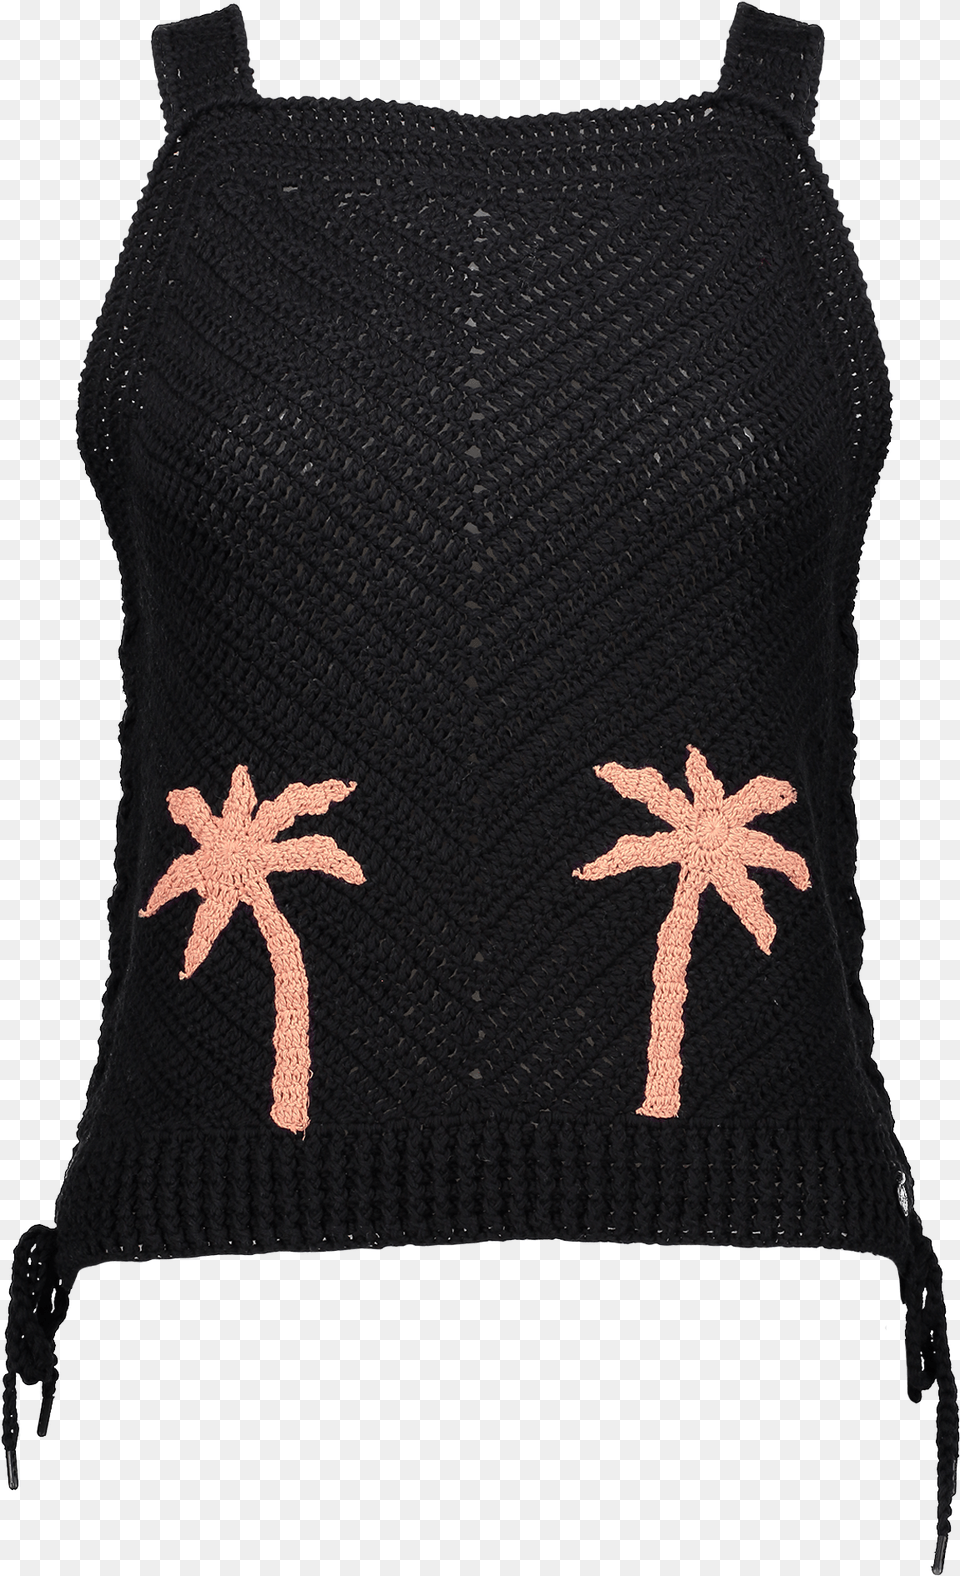 Download Knit Crochet Tank Palm Tree Cross, Cushion, Home Decor, Hat, Clothing Png Image